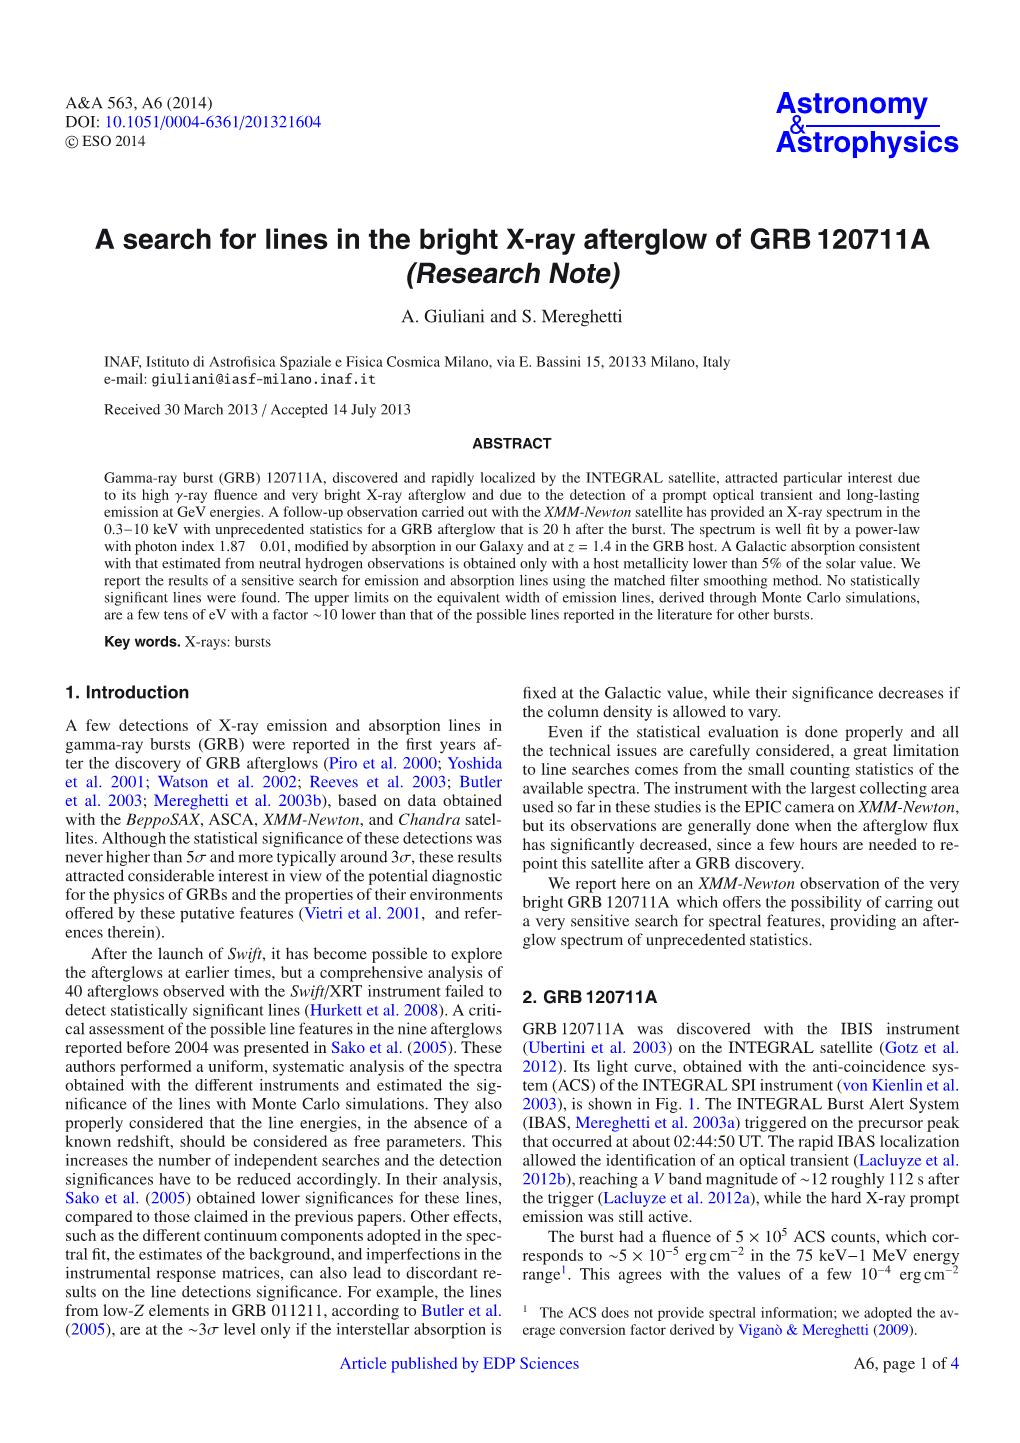 A Search for Lines in the Bright X-Ray Afterglow of GRB 120711A (Research Note)